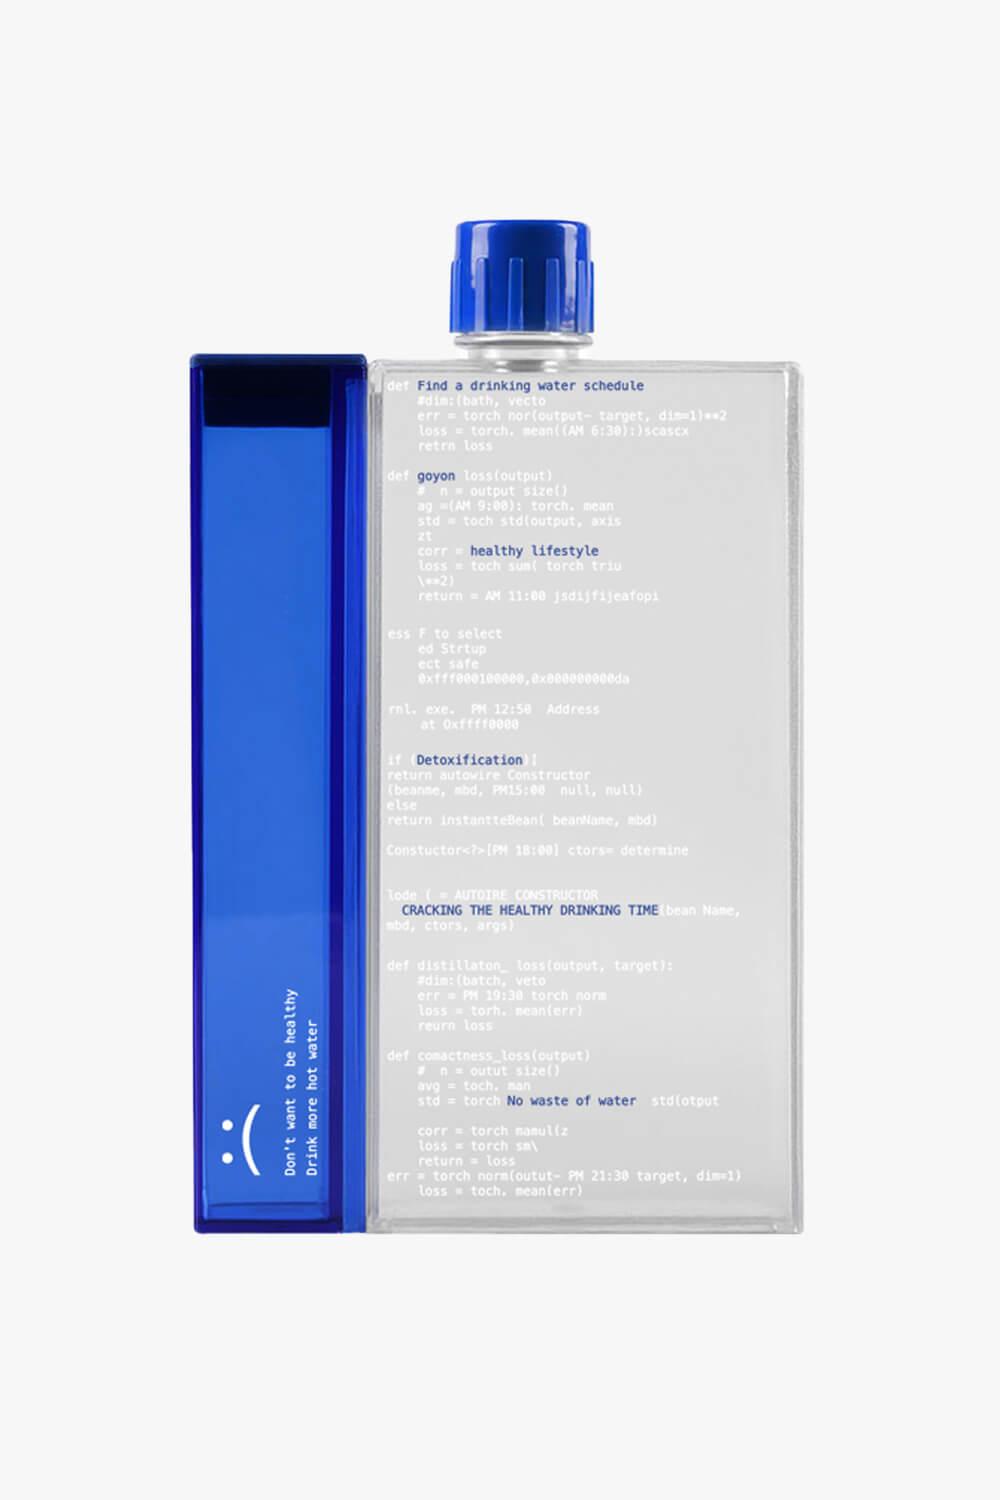 BSOD Art Programming Aesthetic Bottle - Aesthetic Clothes Shop